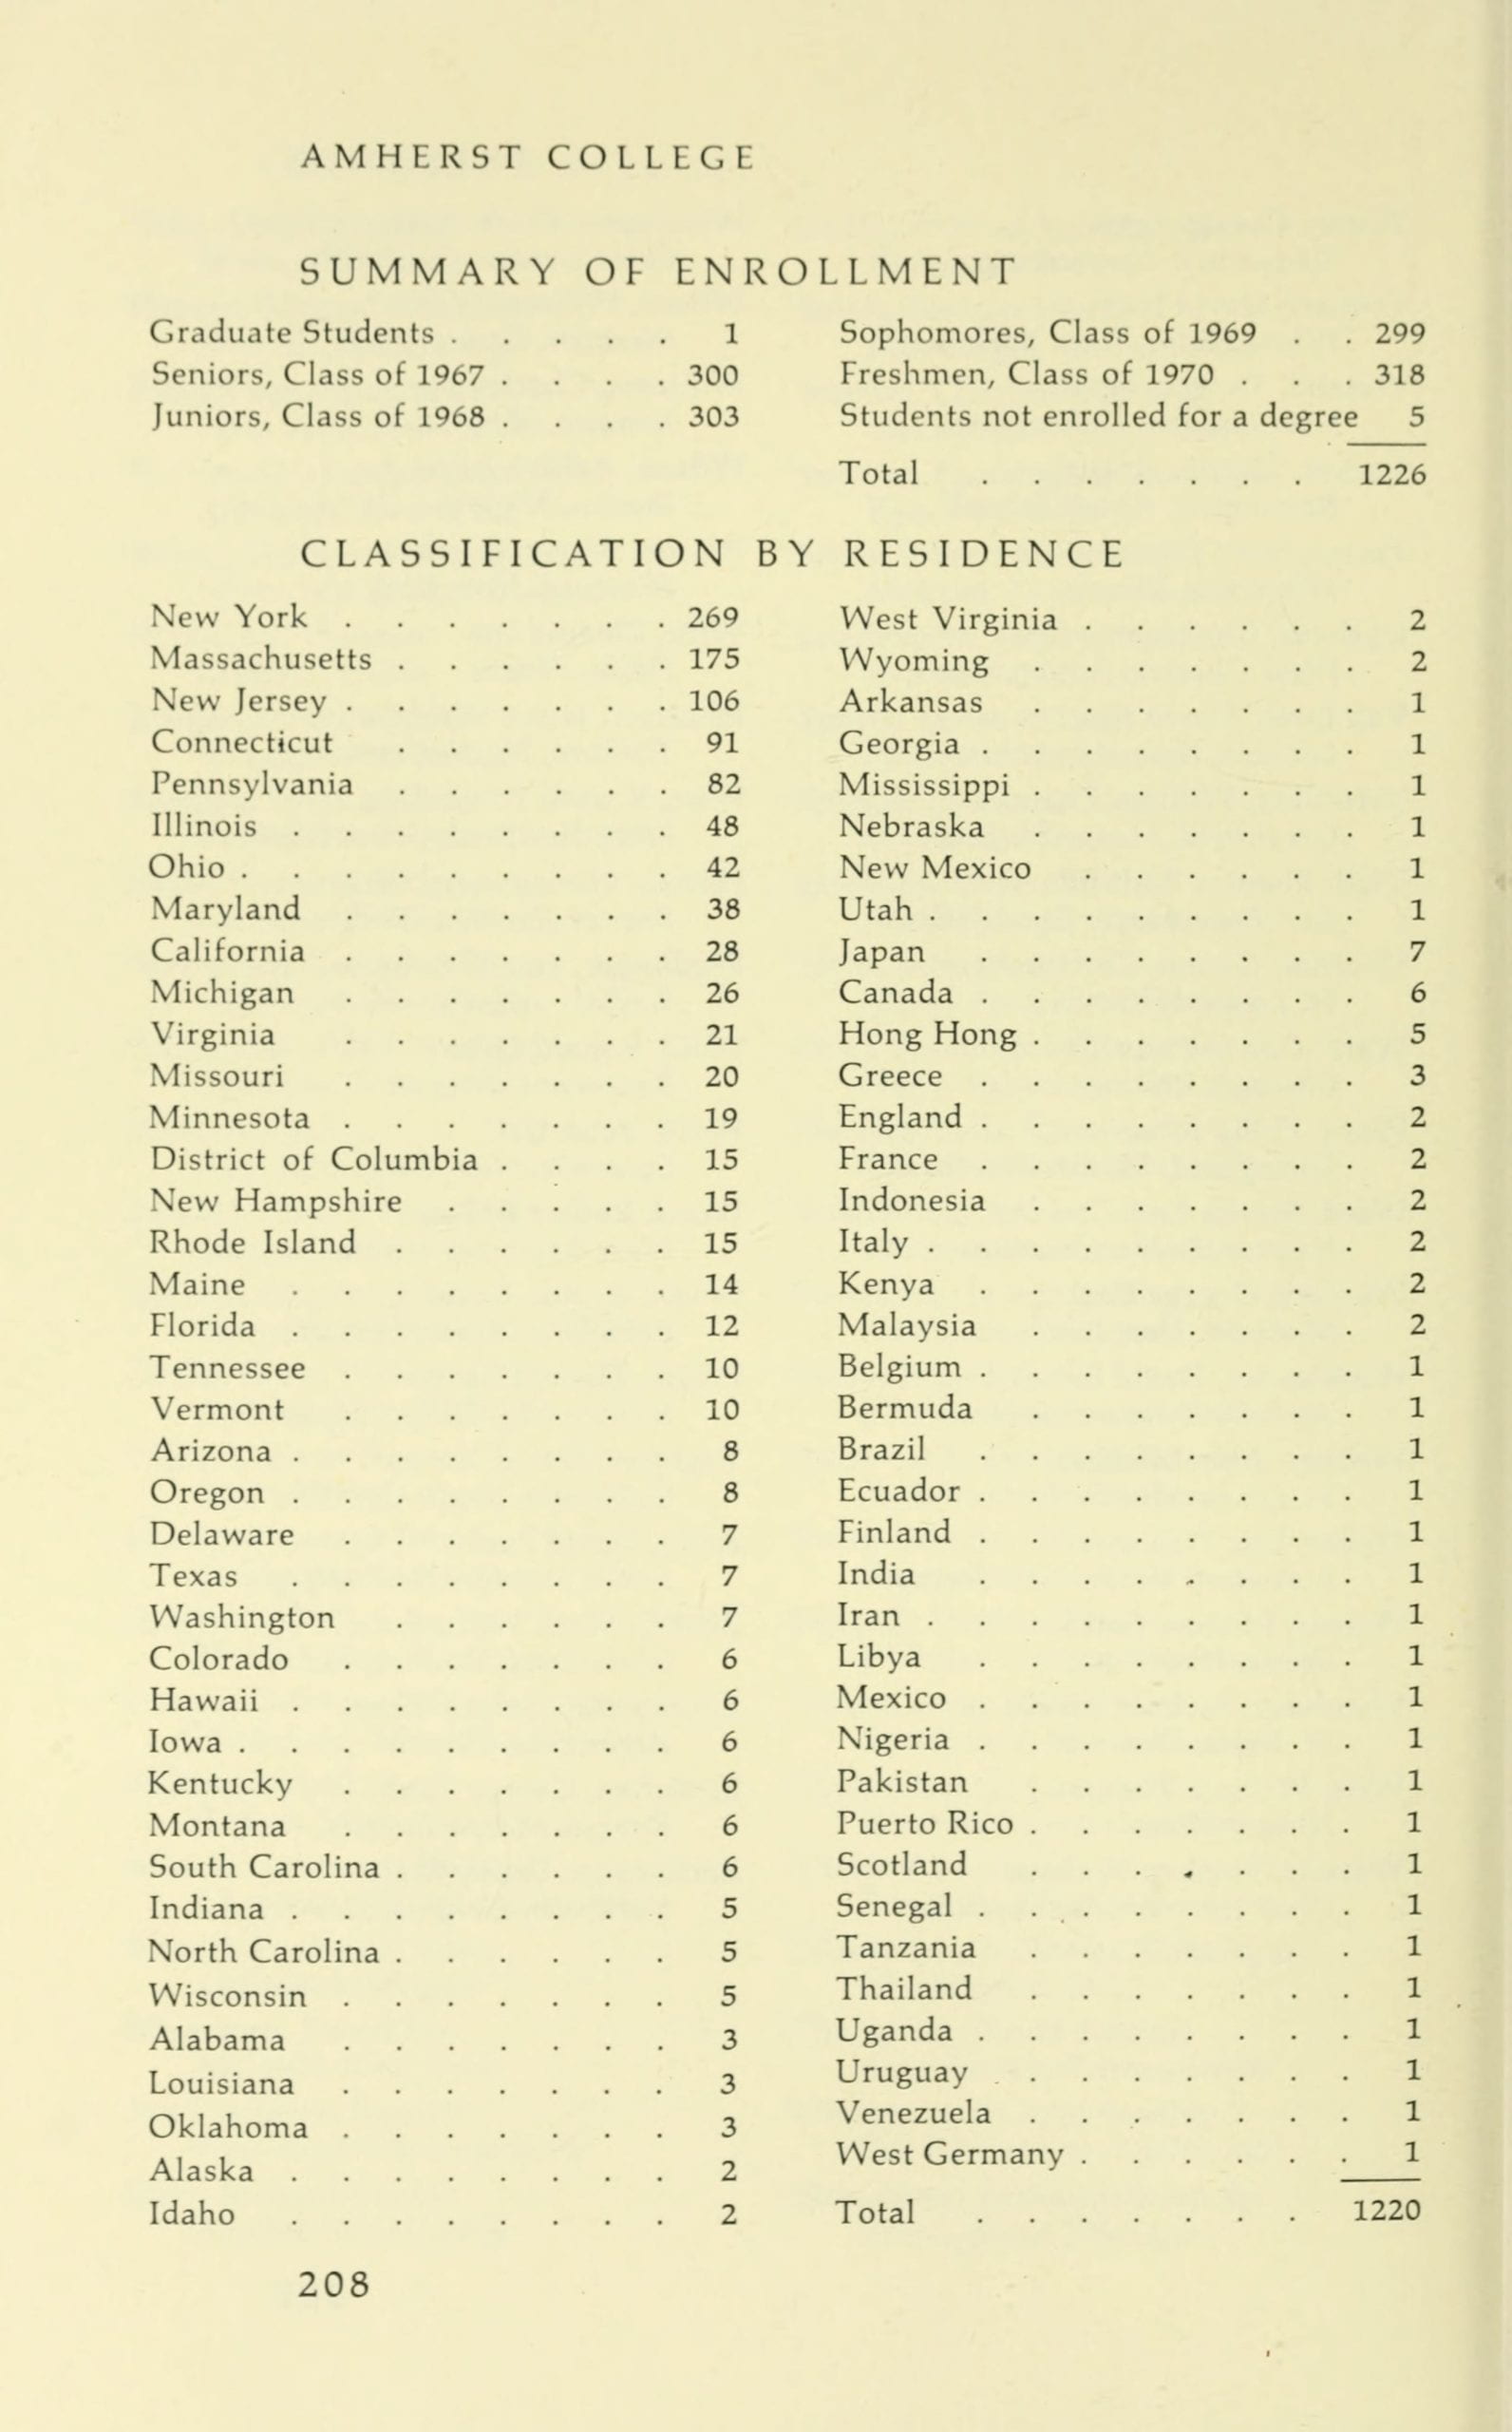 Summary of enrollment for 1966-67